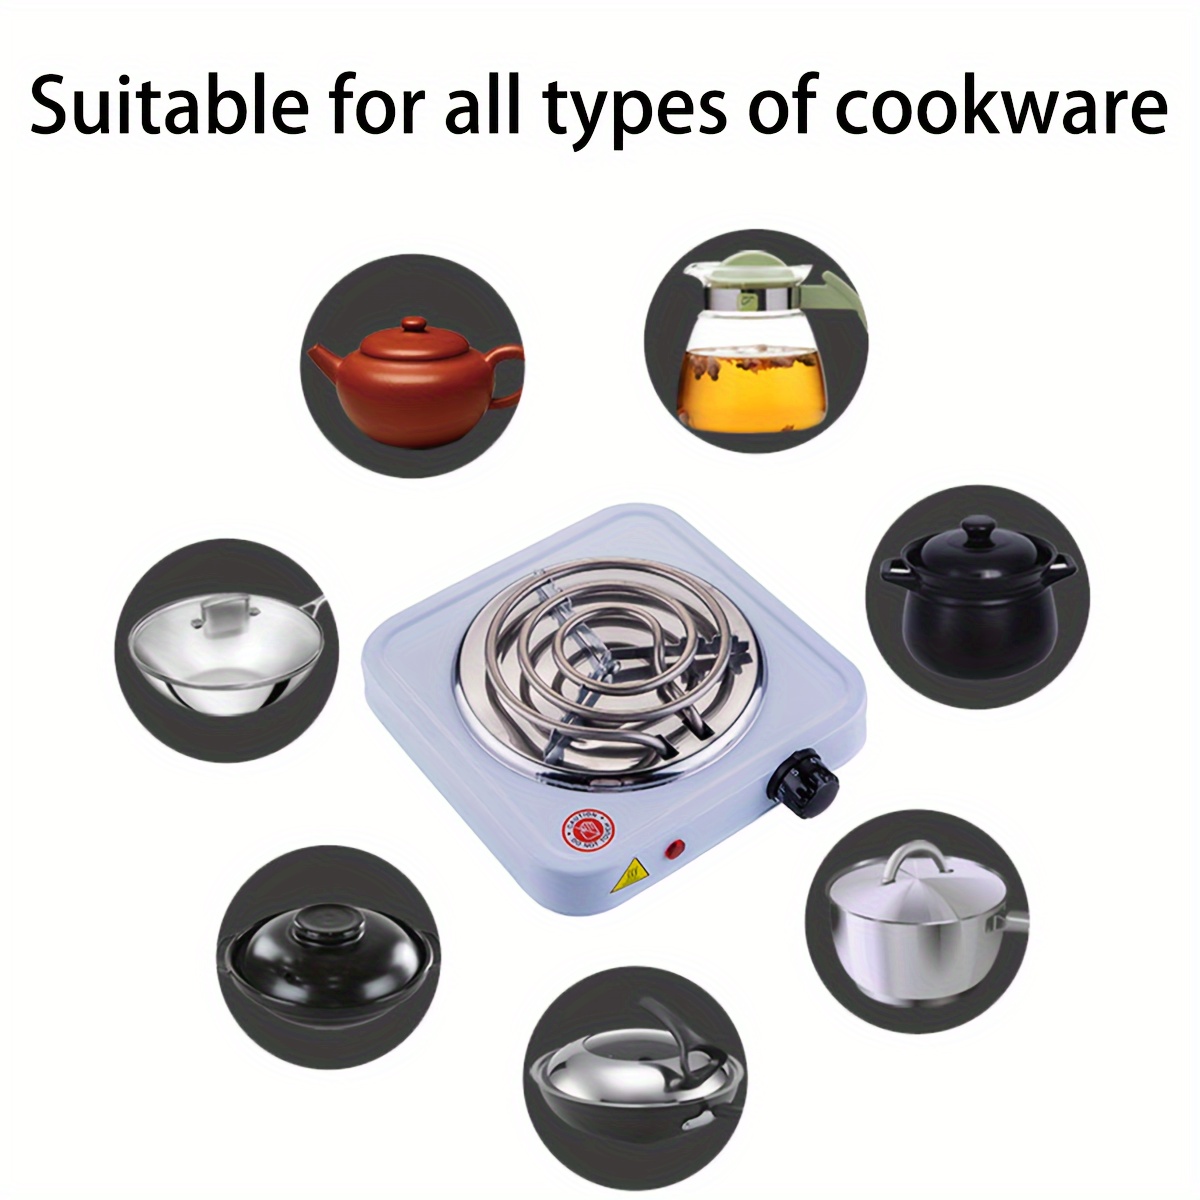  Hot Plate for Candle Making - Electric Hot Plate for Melting  Wax - Electric Stove Burners - 1000W Hot Plates For Cooking, Portable Stove  Top - Cofee Maker to brew coffee